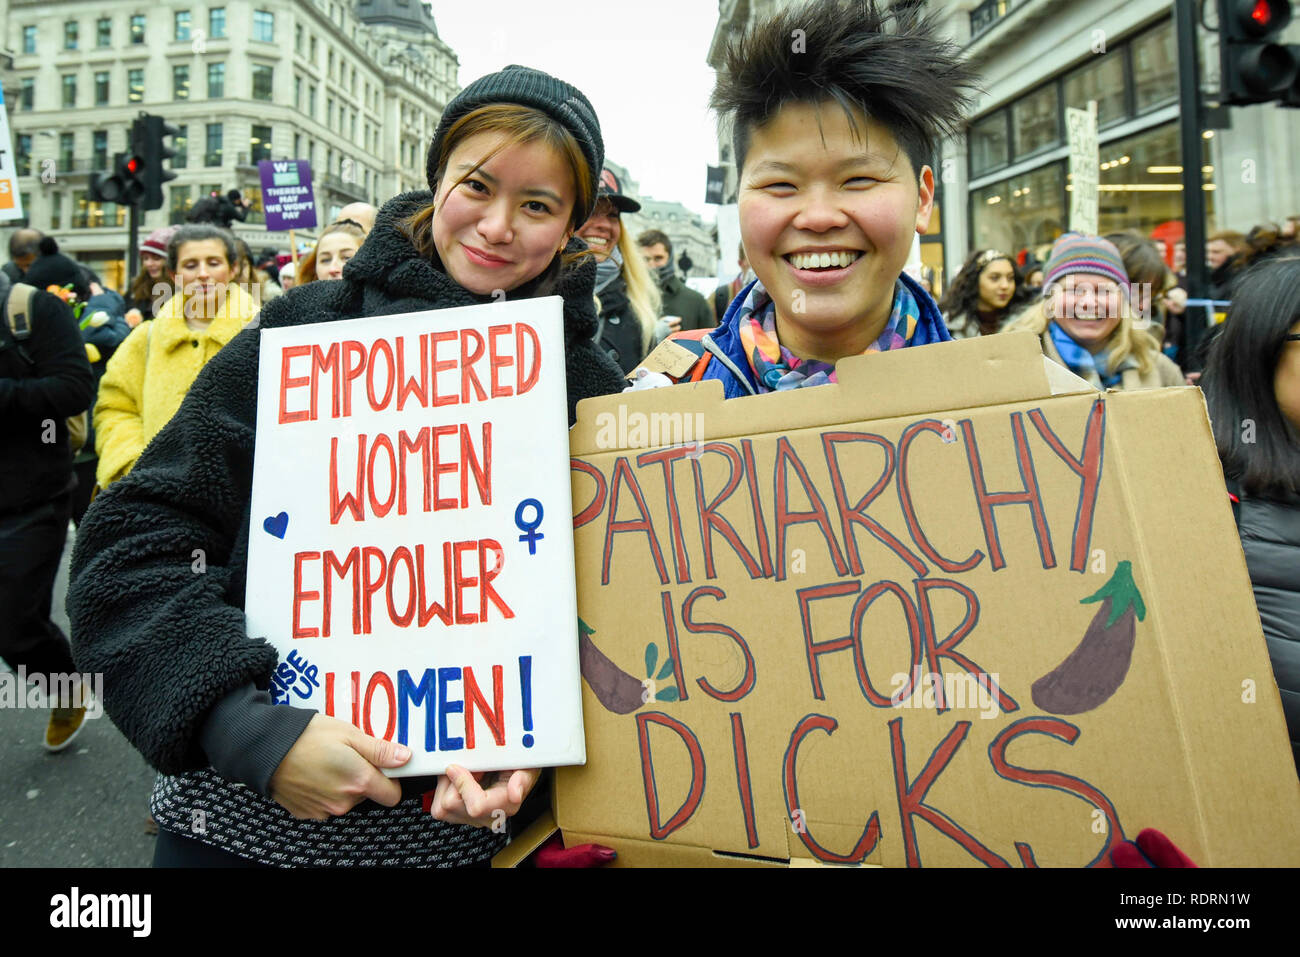 London, UK. 19th Jan, 2019. Katie Leung (L), actress, holds up a sign during the Women's March in the capital, one of 30 such worldwide marches protesting against violence against women and the negative impact of austerity policies. London's theme this year is 'Bread and Roses', honouring Polish-American suffragette Rose Schneiderman who, in 1911 said 'The worker must have bread but she must have roses too', in response to a factory fire where 146 mainly female garment workers died. Credit: Stephen Chung/Alamy Live News Stock Photo